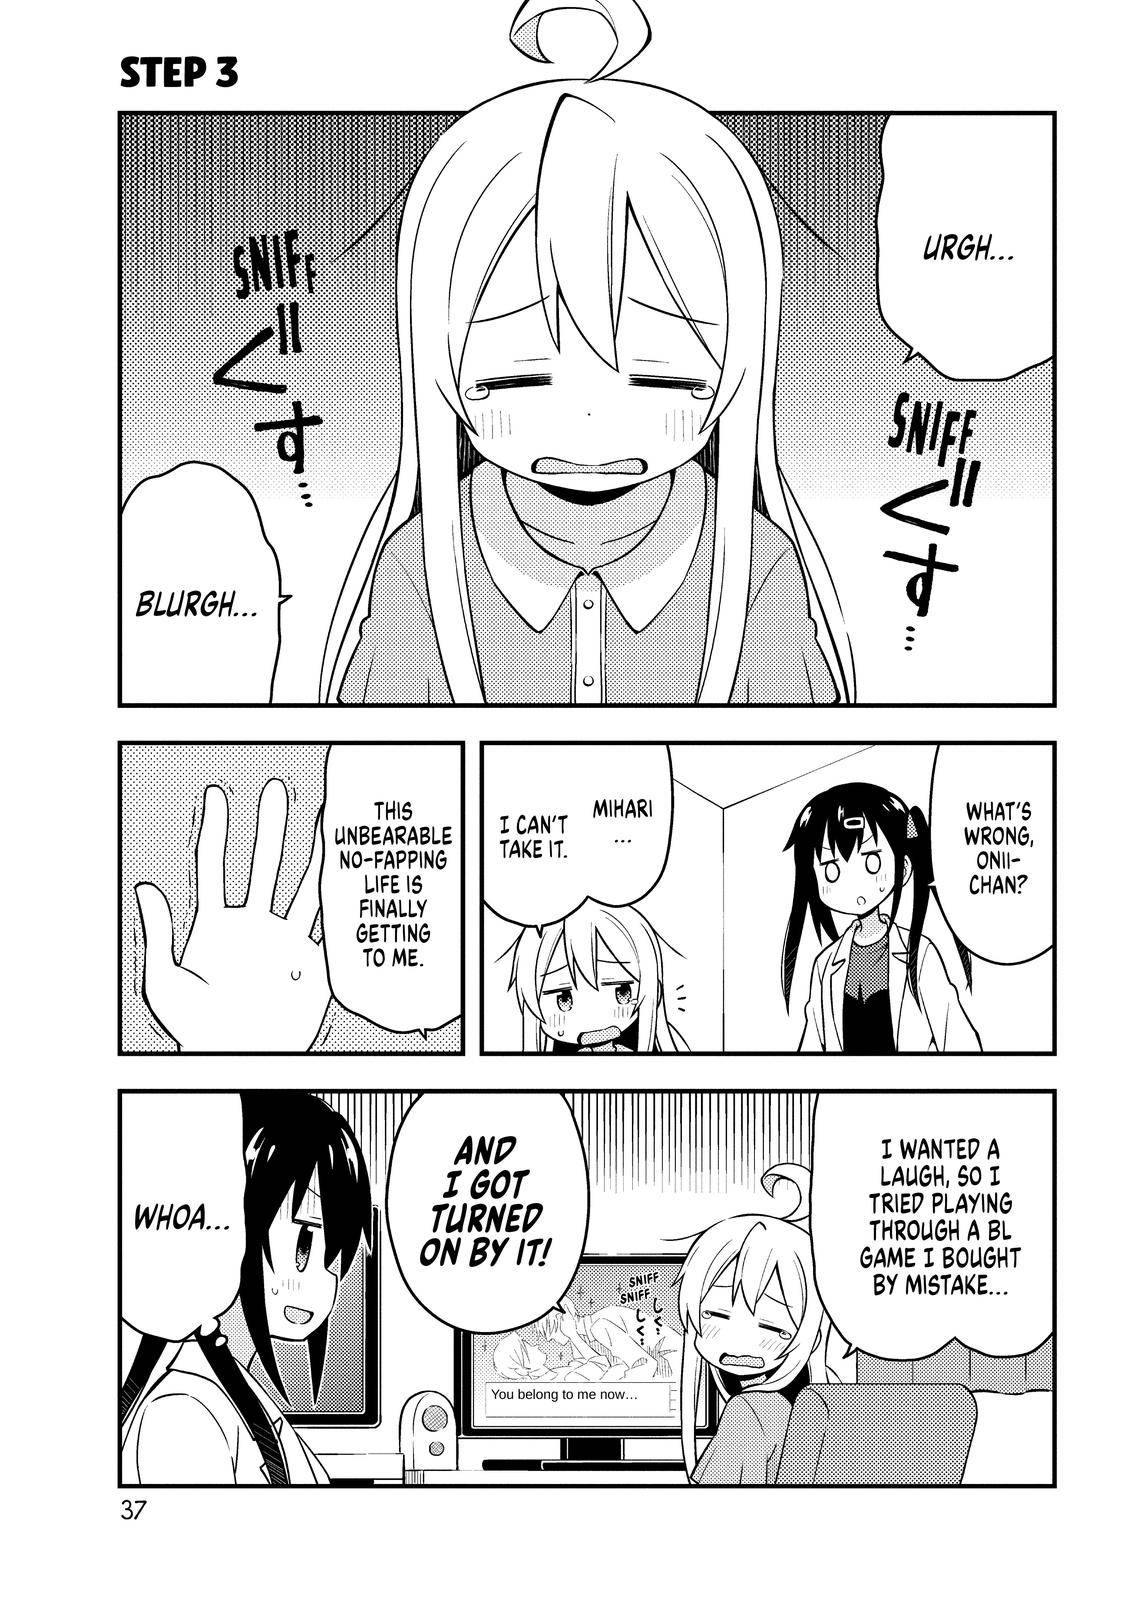 ONIMAI - I'm Now Your Sister! - chapter 3 - #1